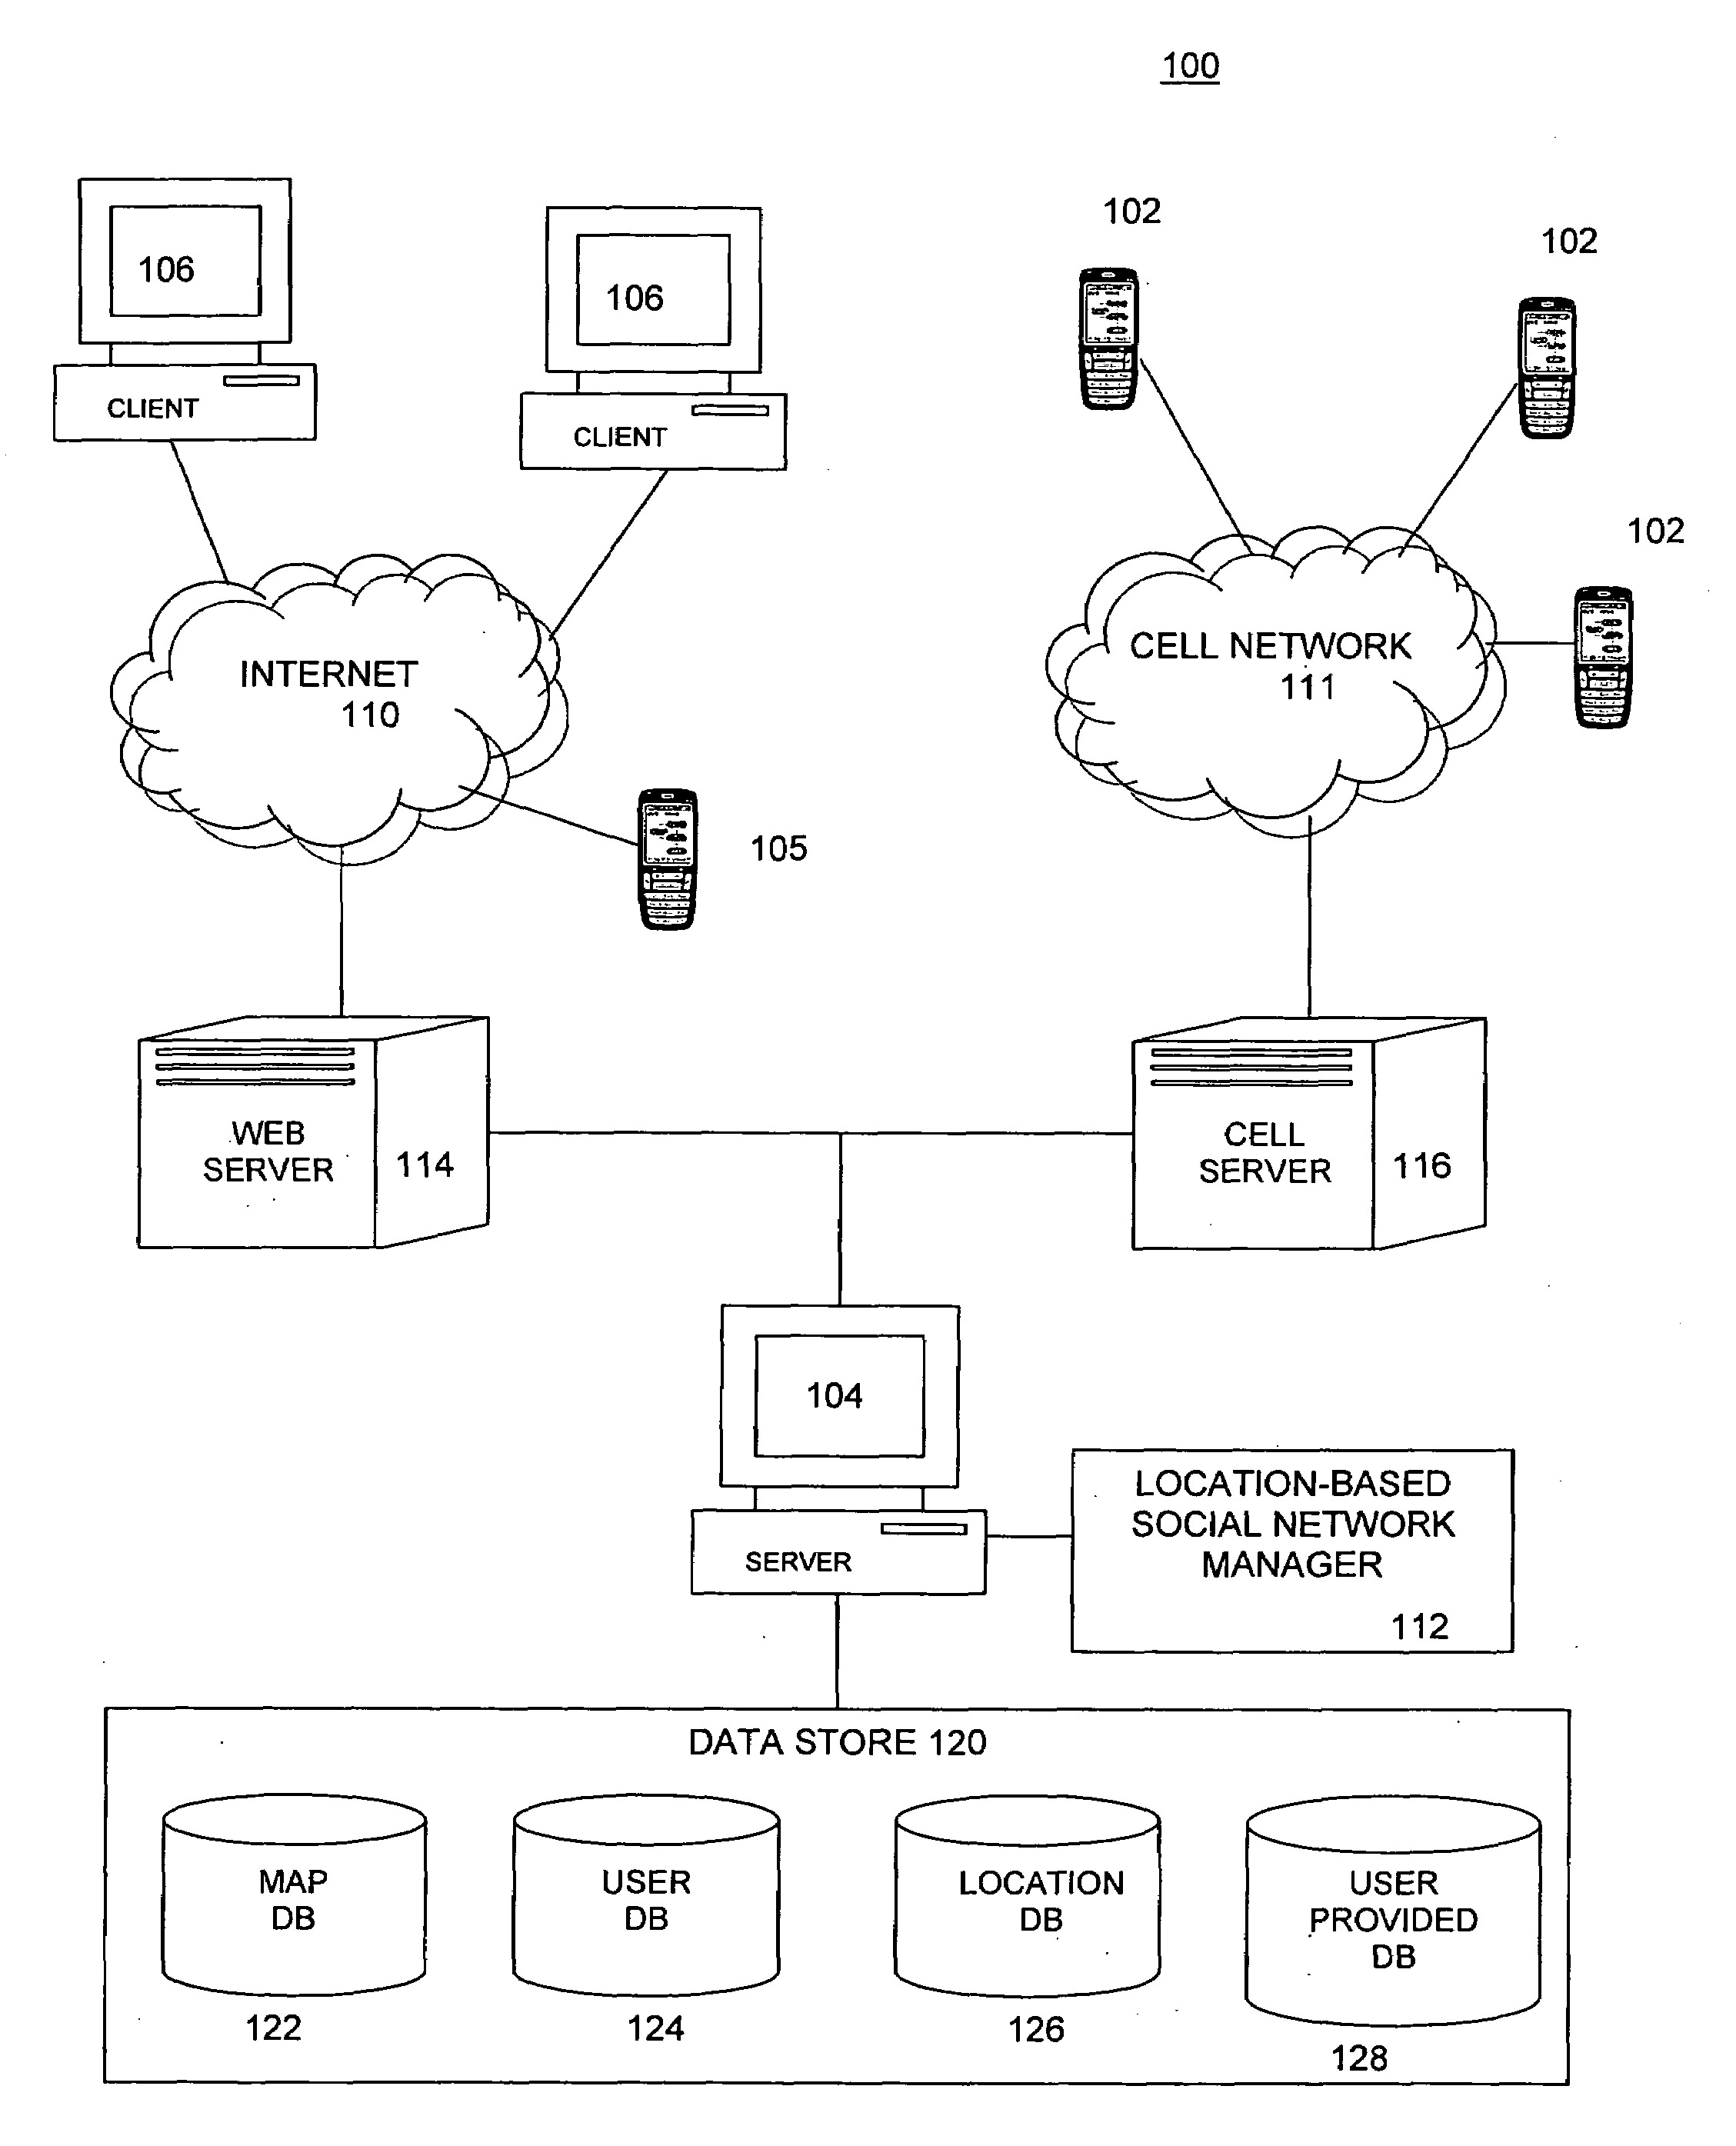 Mobile dating system incorporating user location information